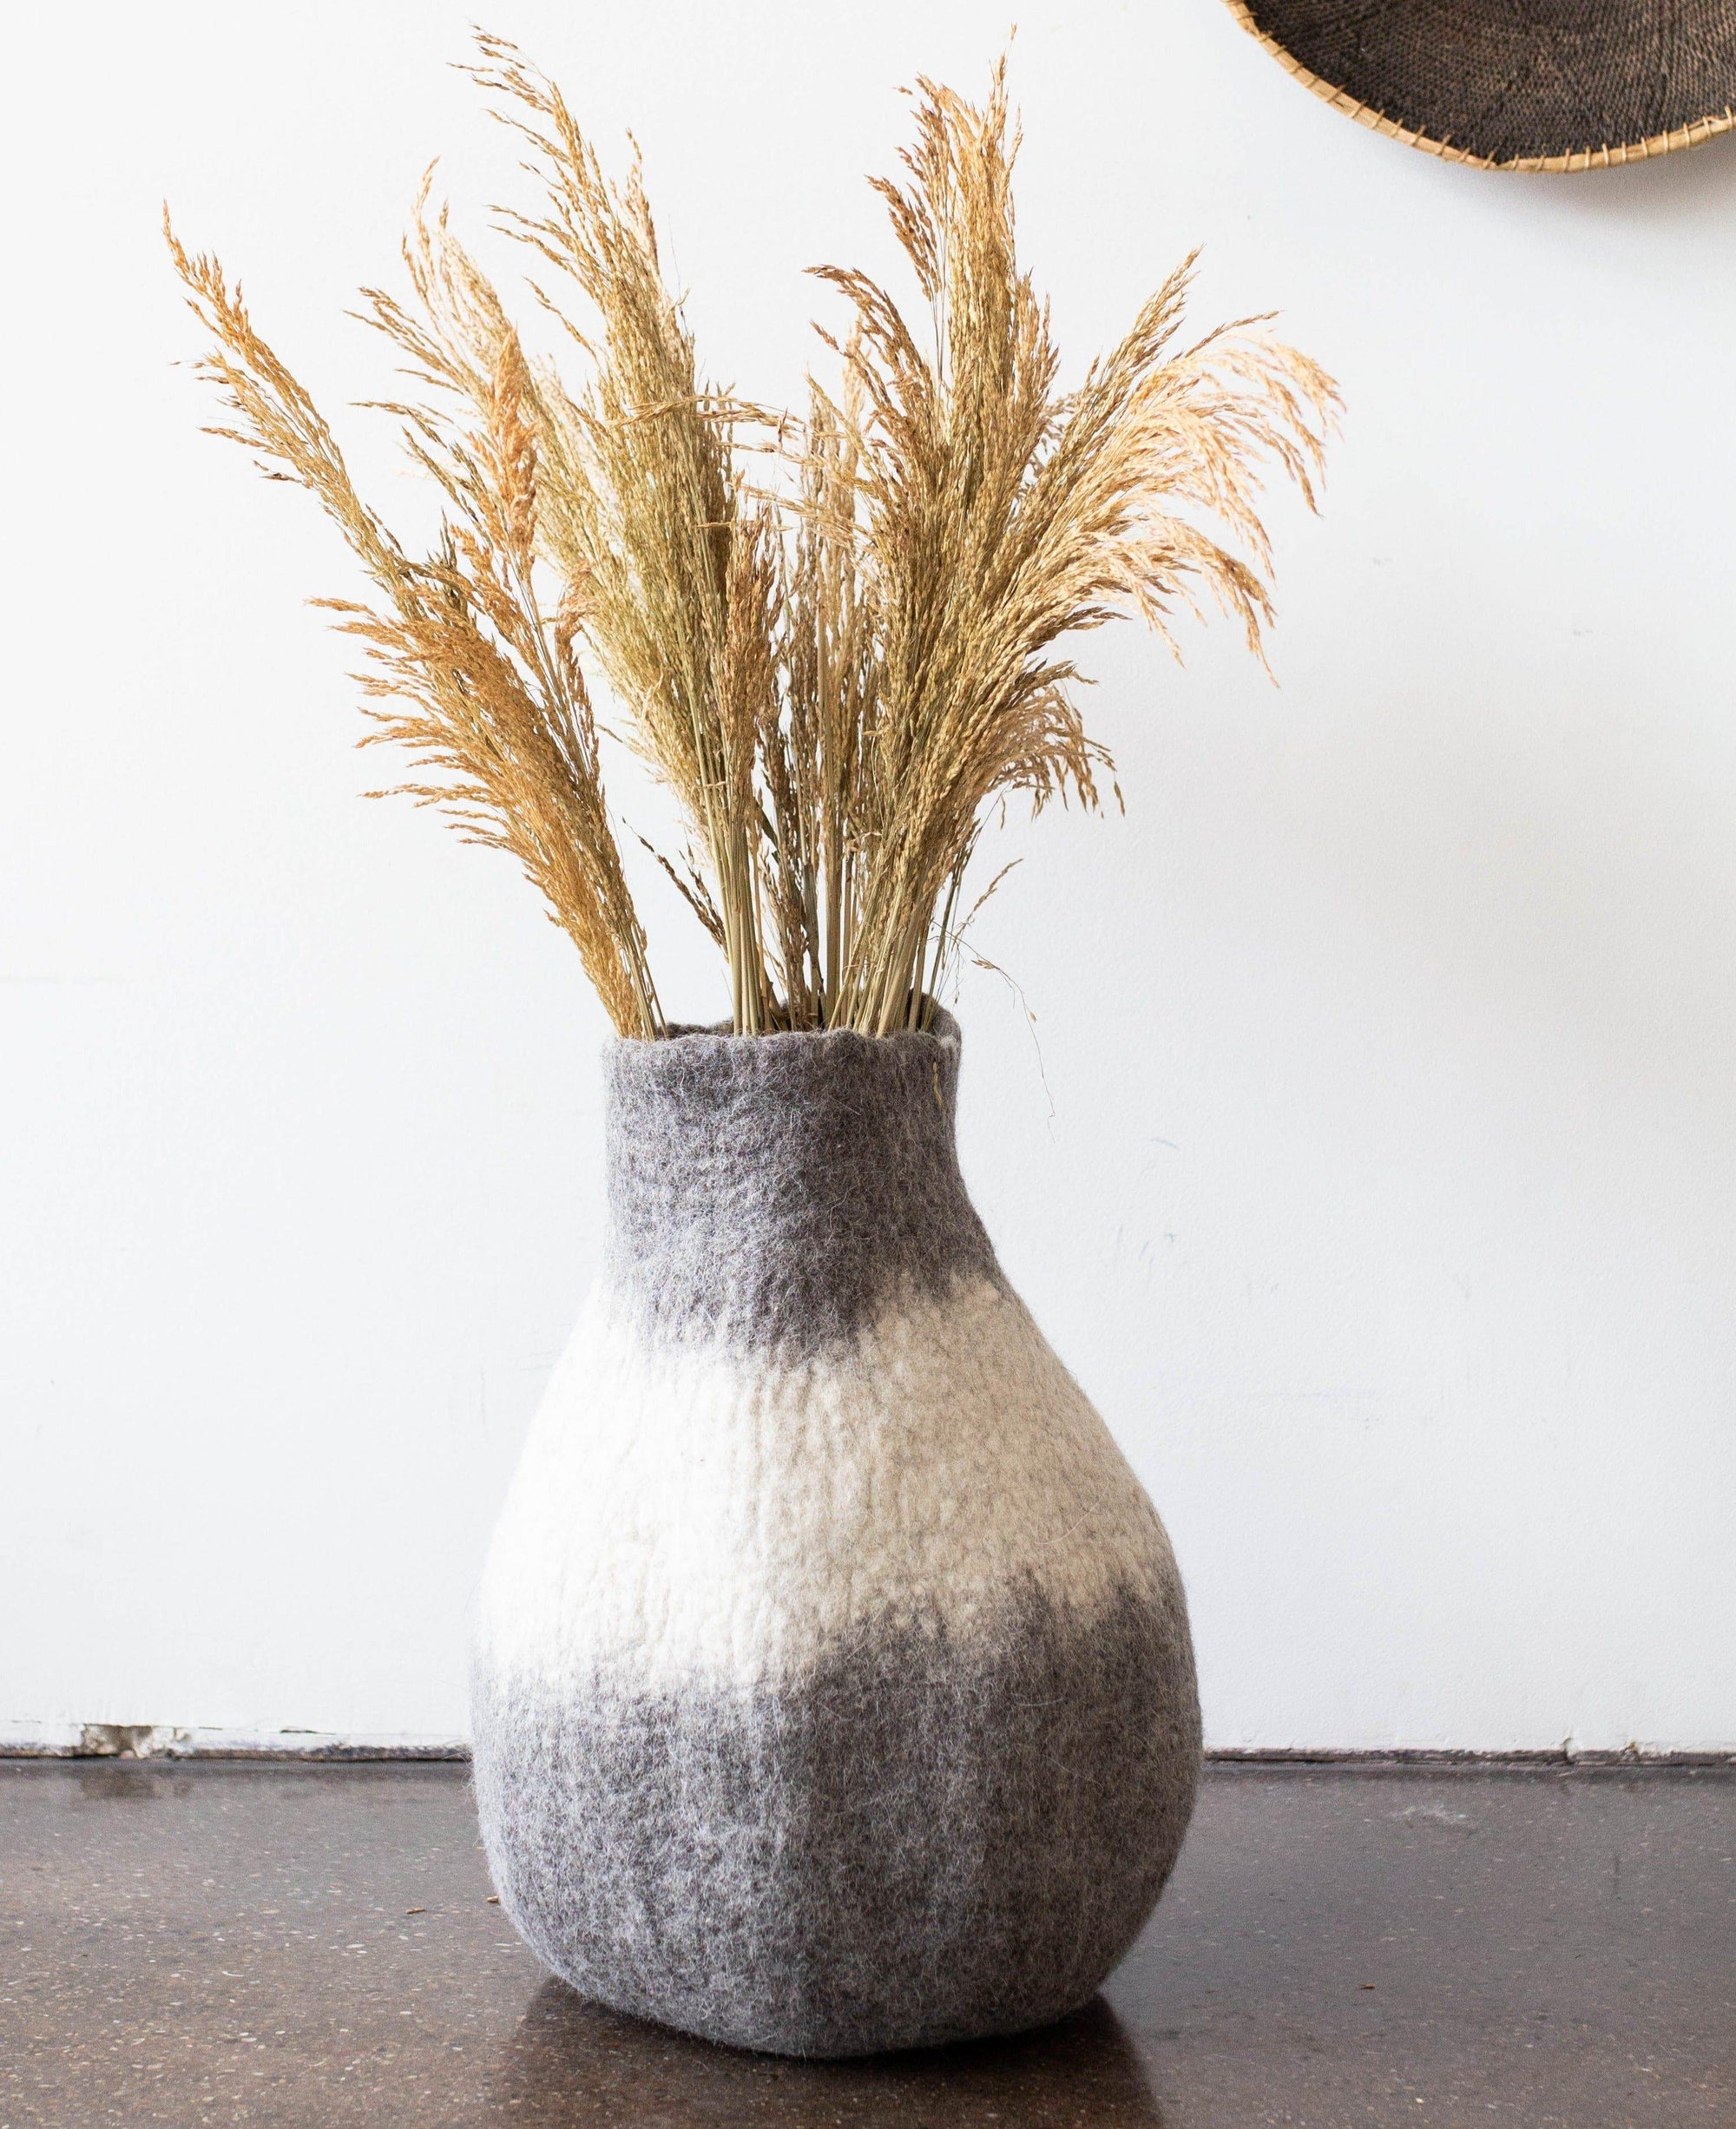 Eclipse Gourd kanju interiors floor table shelf organic unique modern contemporary stylish minimal luxury home goods gift hand felted felt hand dyed karakul wool South Africa functional décor decorative decoration texture soft durable washable collapsible ombre gourd basket small large charcoal gray natural white storage planter